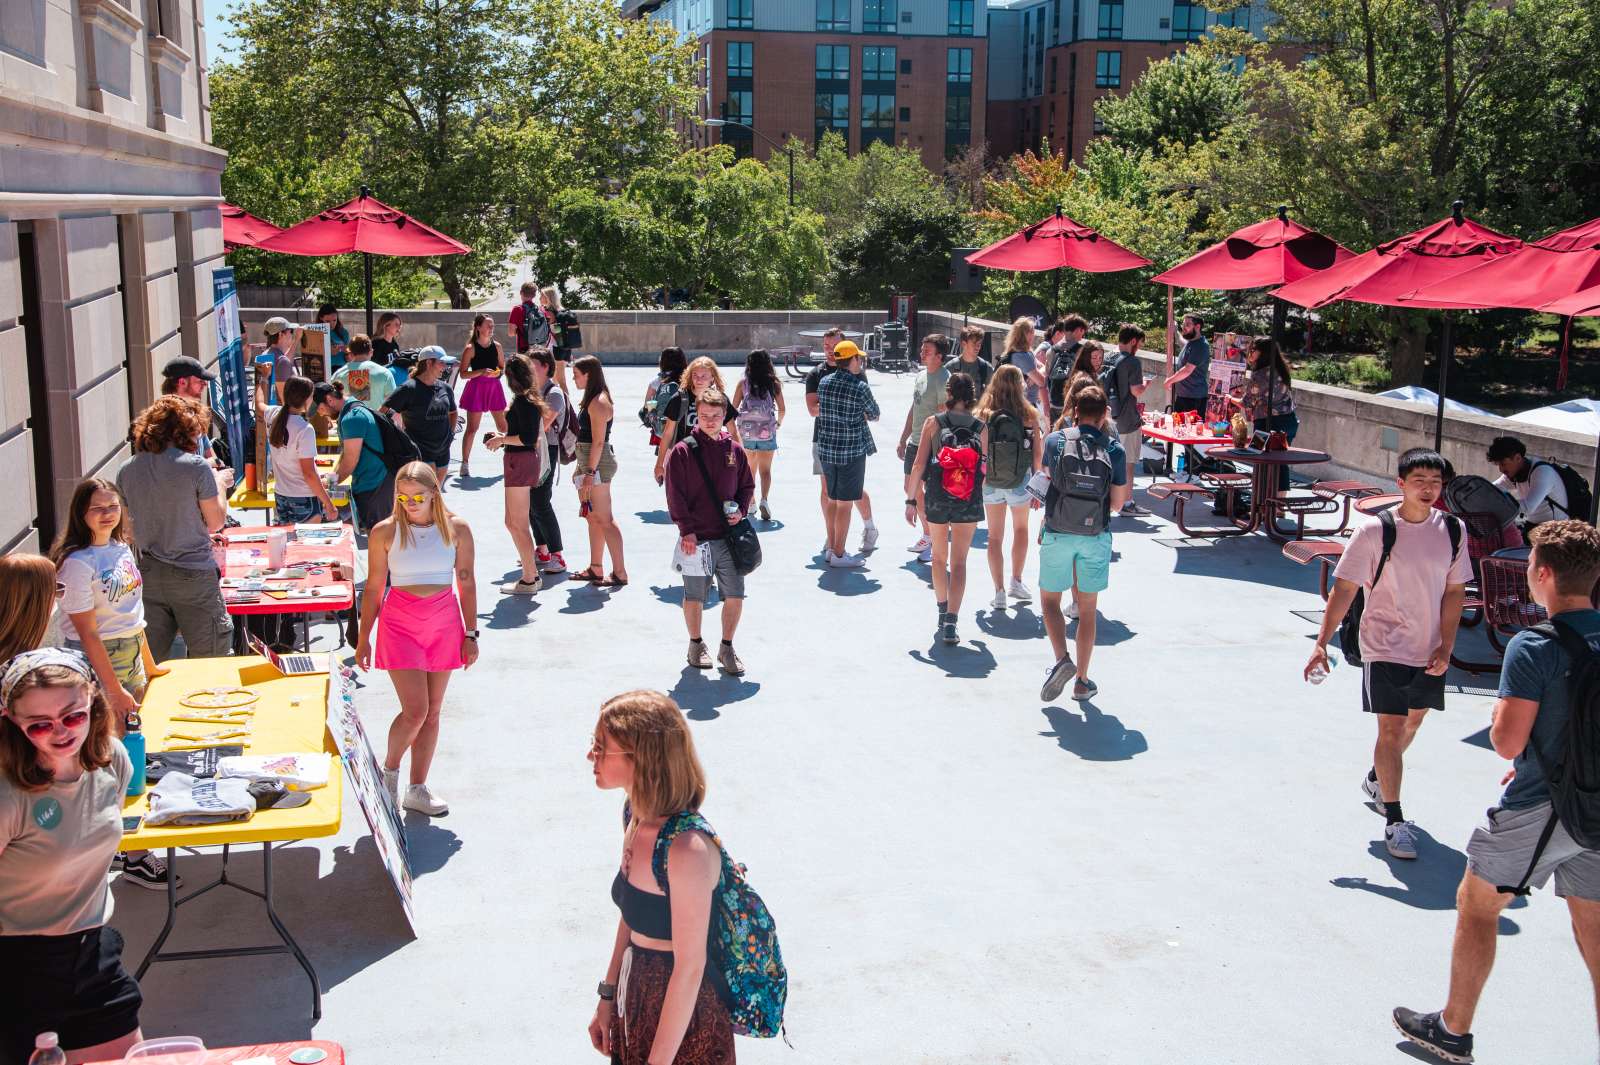 Crowd of students visiting red-tented Clubfest booths onthe Iowa State Memorial Union terrace.